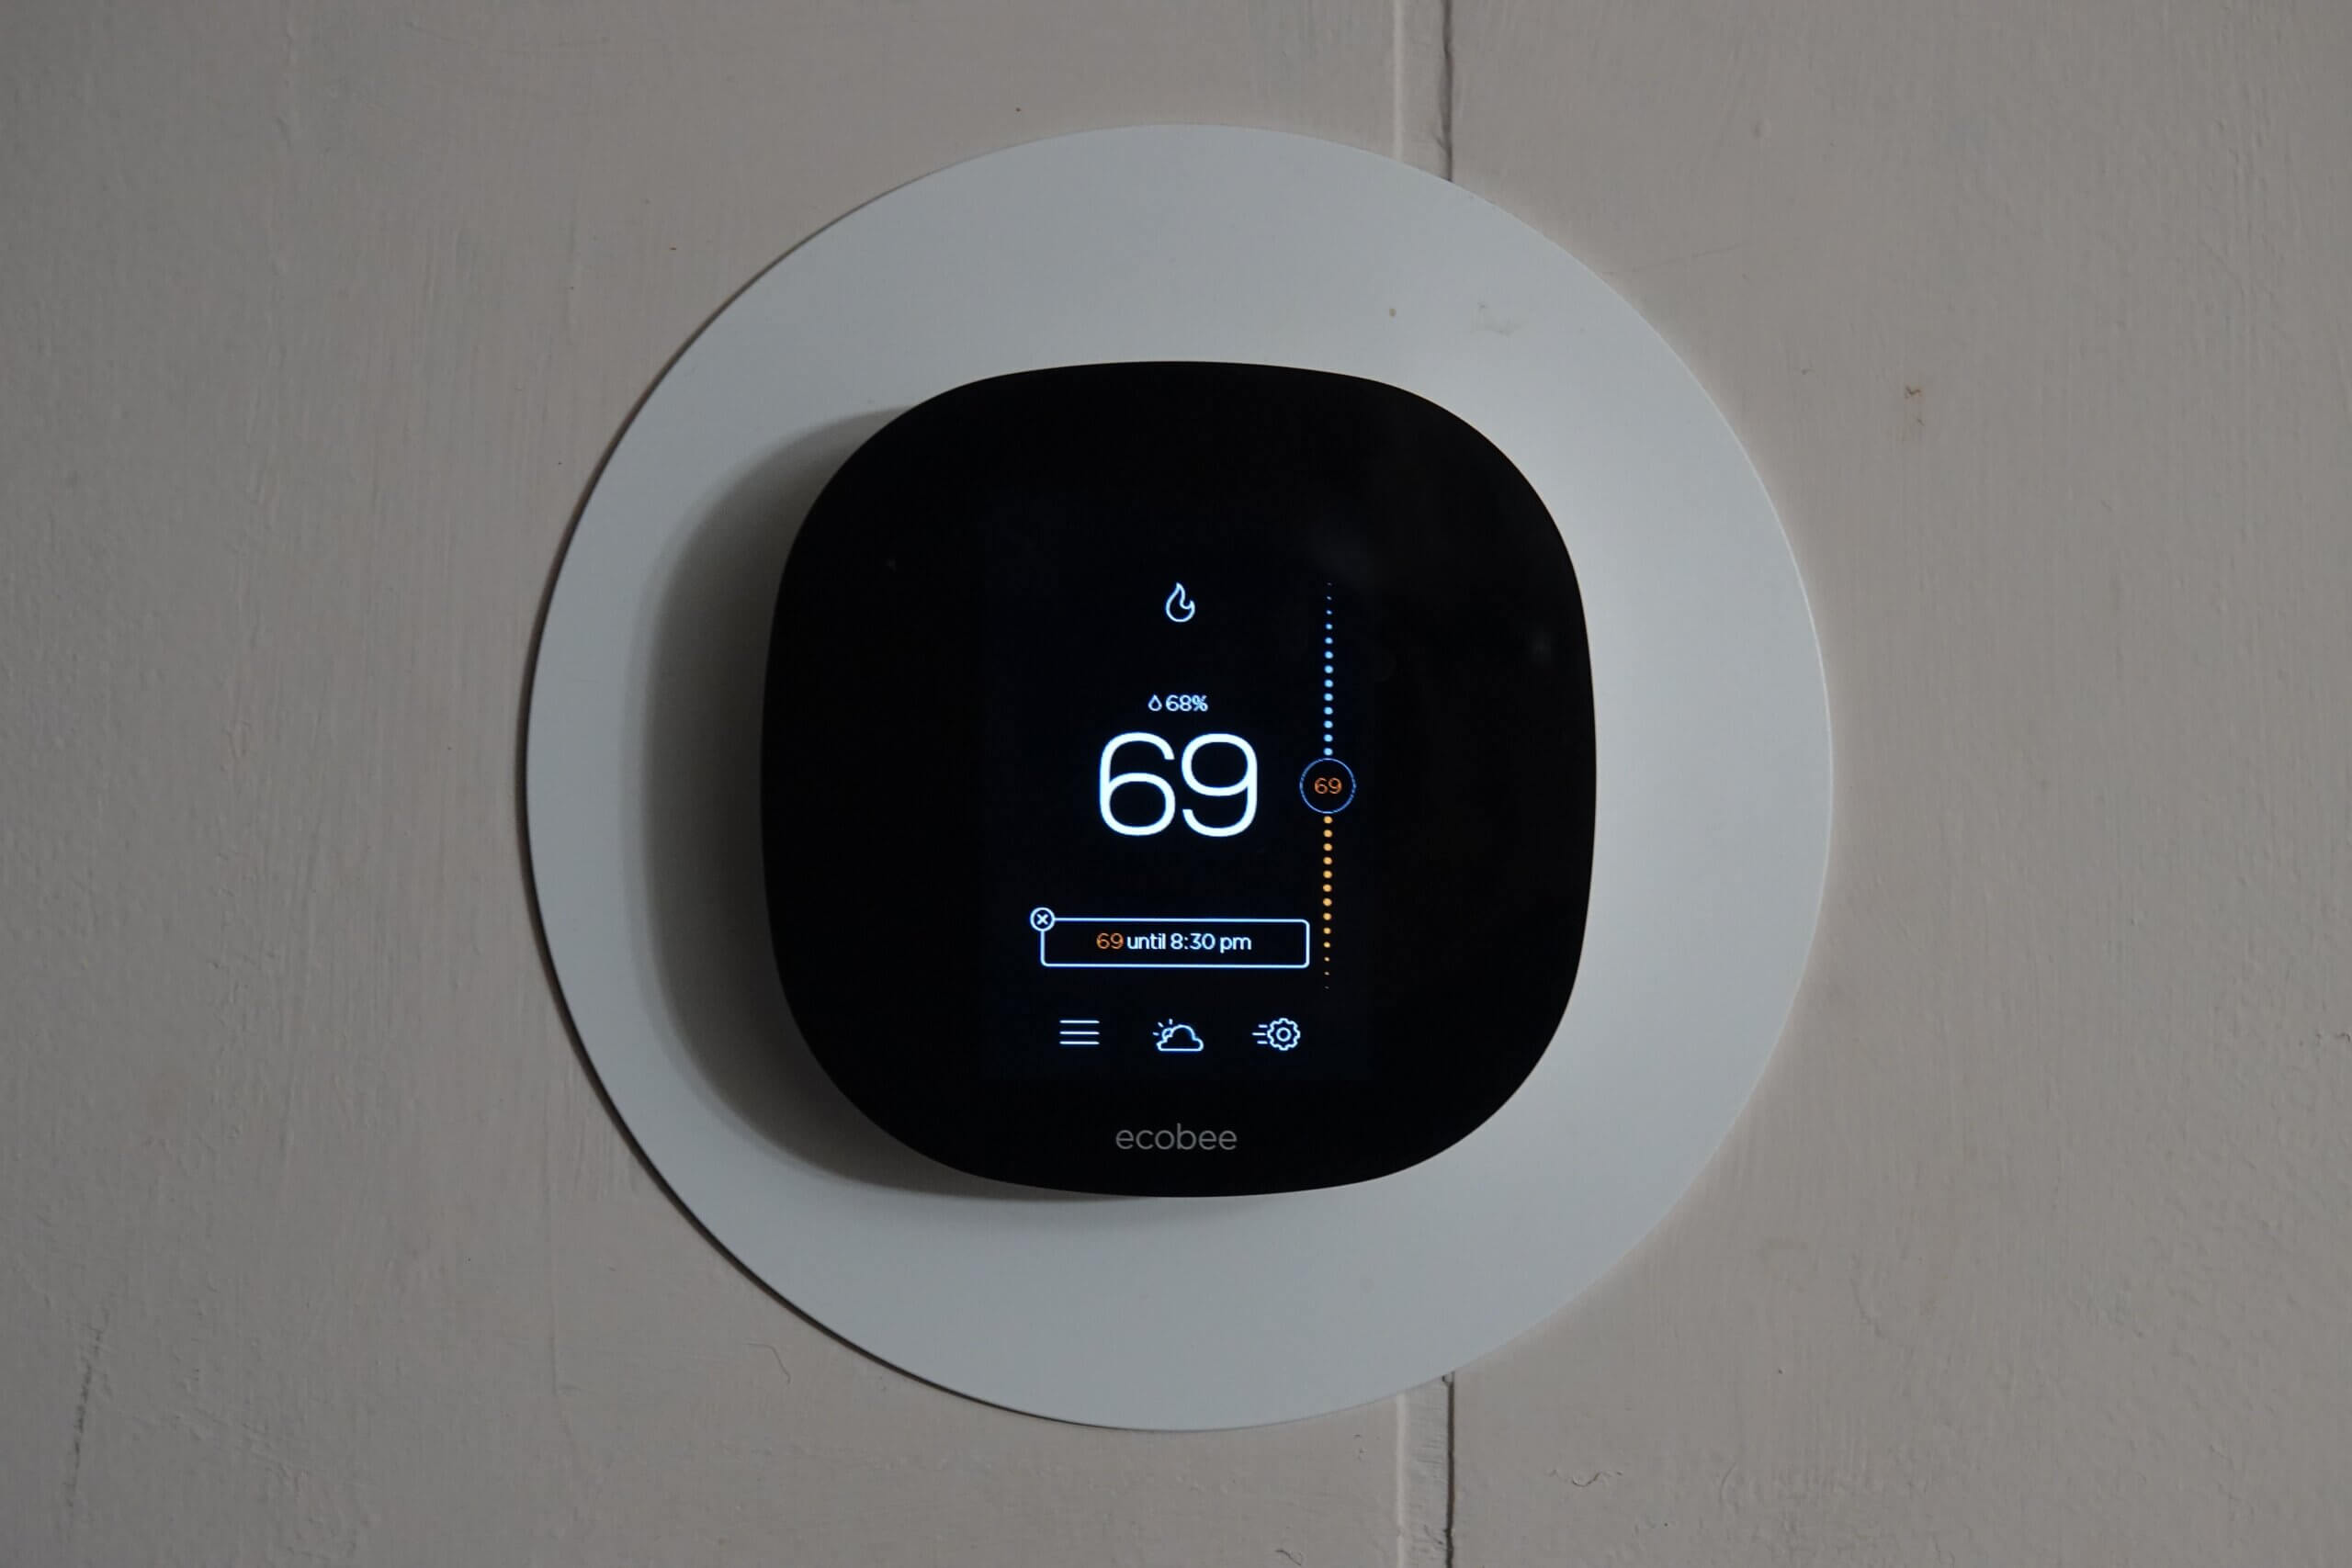 digital thermostat showing 69 degrees F